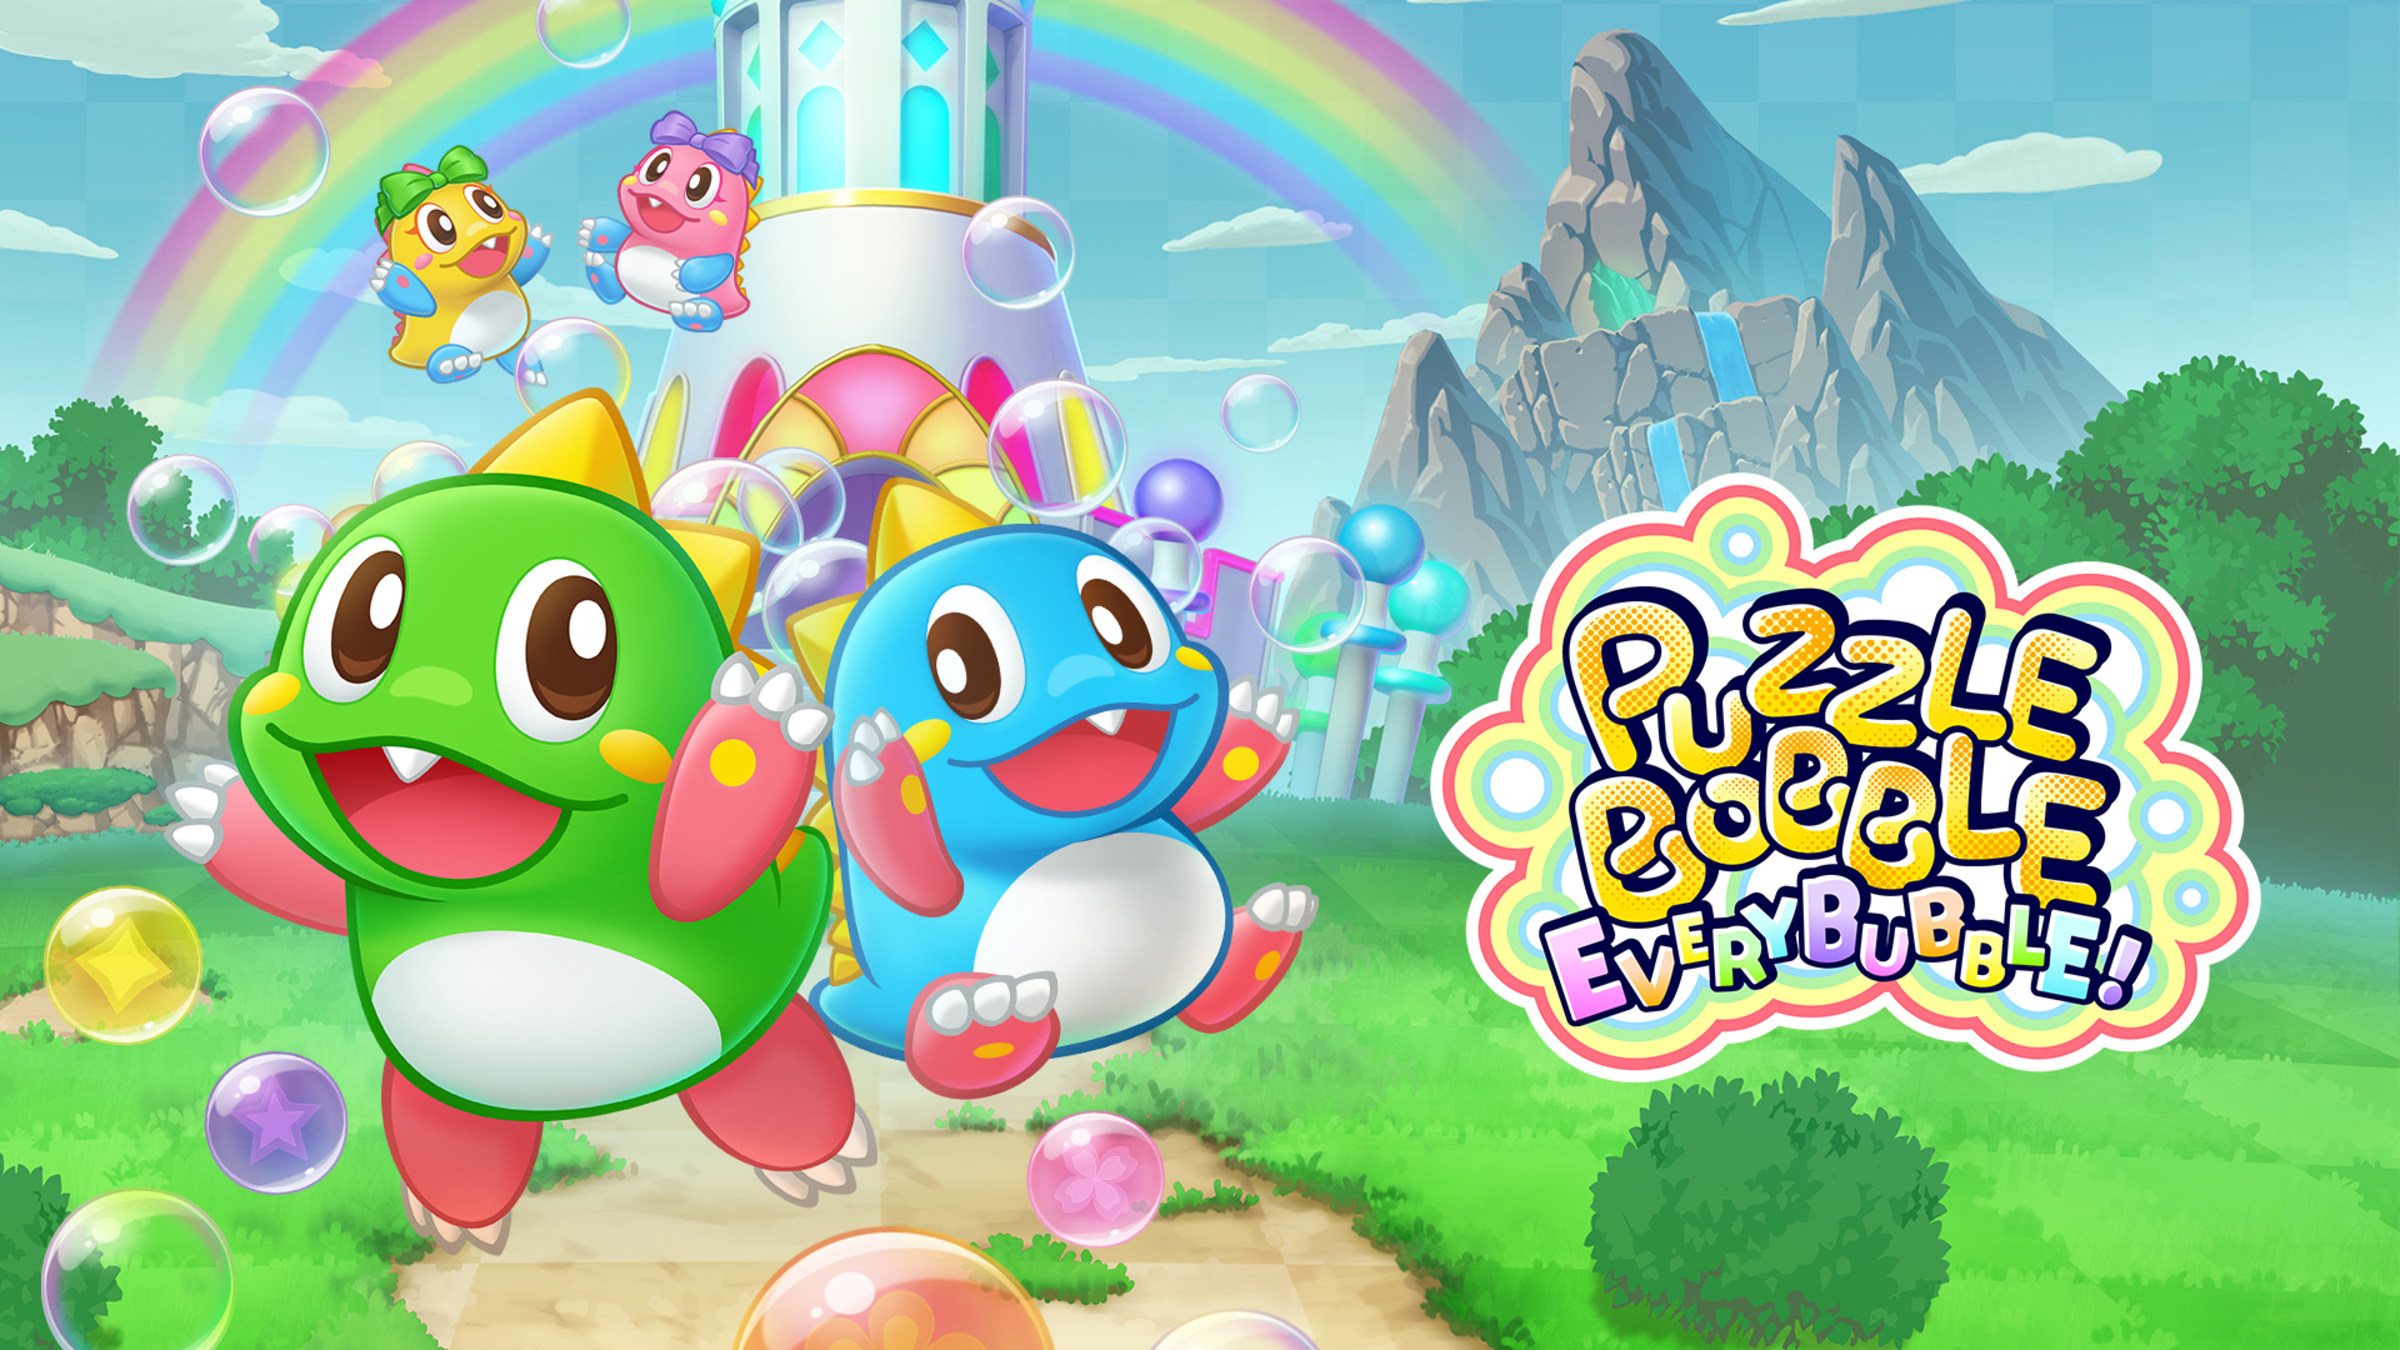 PUZZLE BOBBLE free online game on